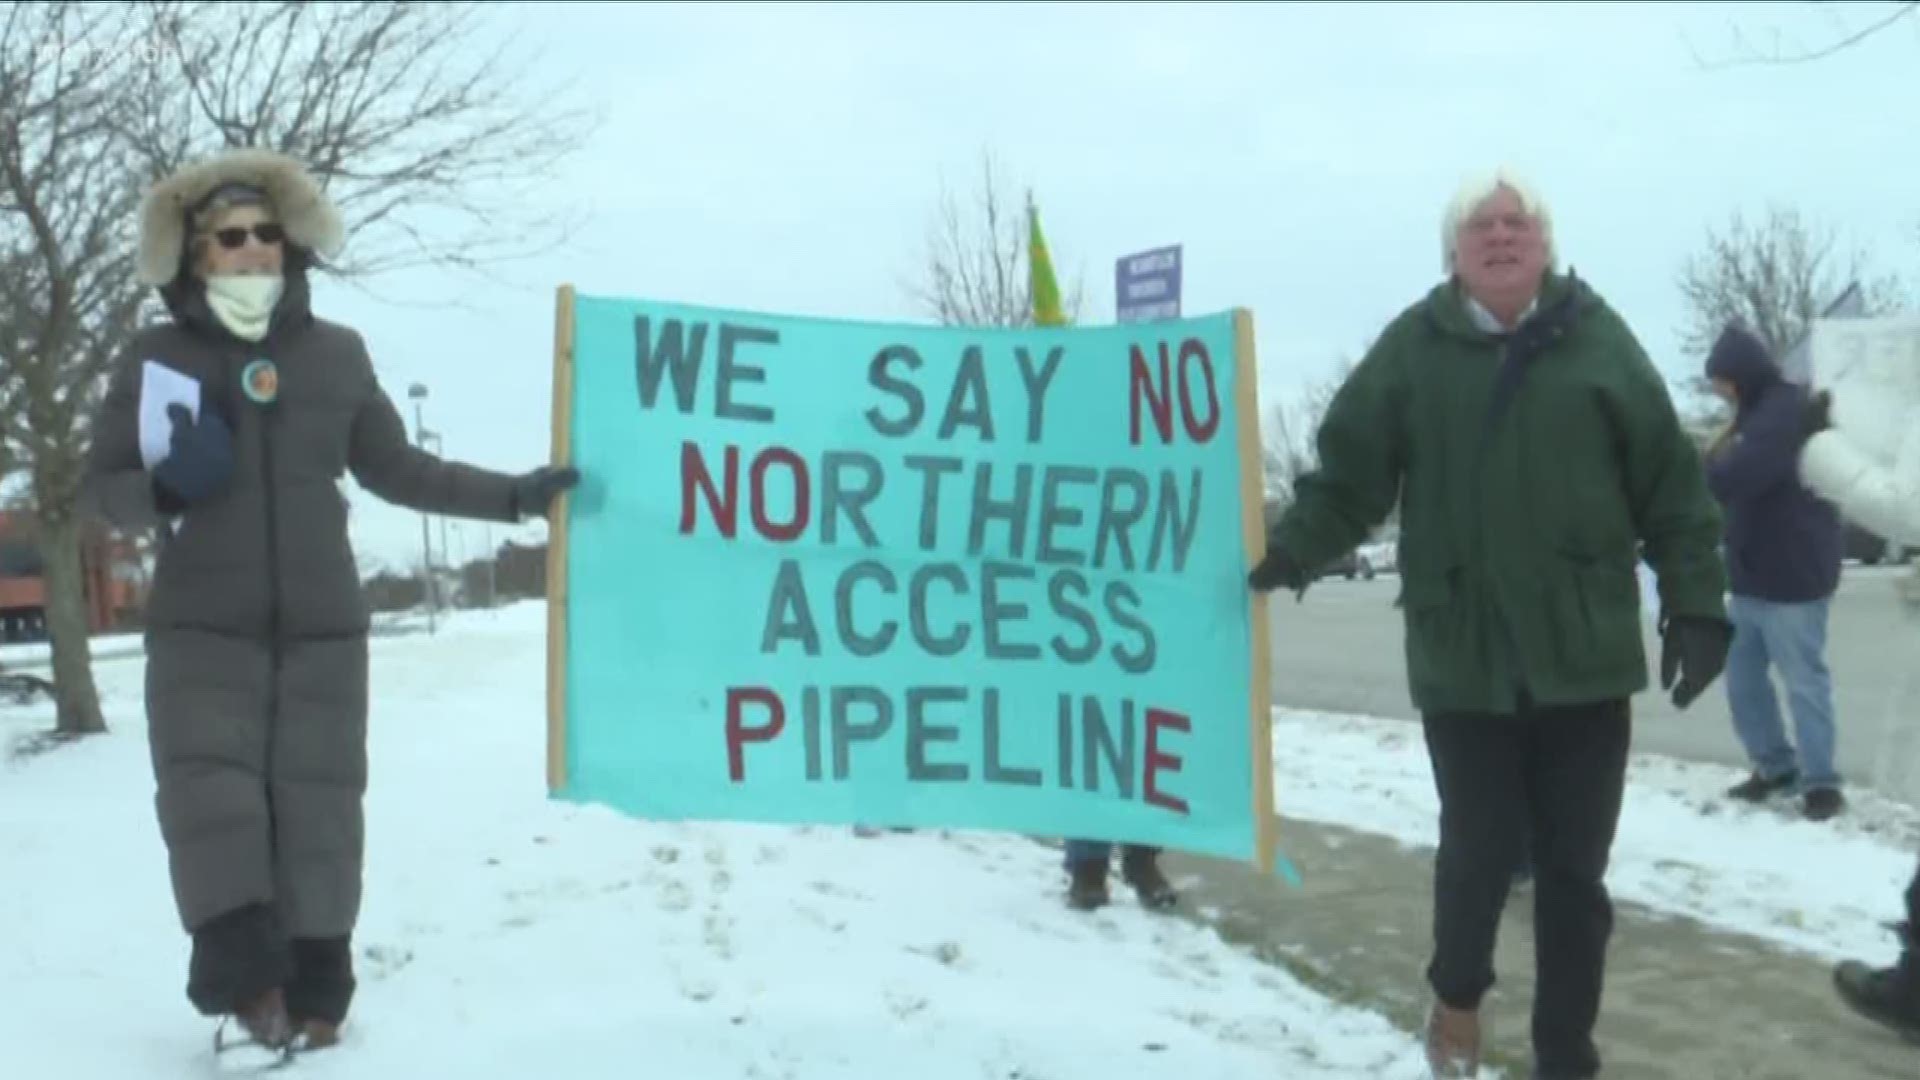 National Fuel wants to build a northern access pipeline to carry natural gas from western Pennsylvania through western New York and into Canada.
Some residents fear the project could lead to water contamination and protested the pipeline.